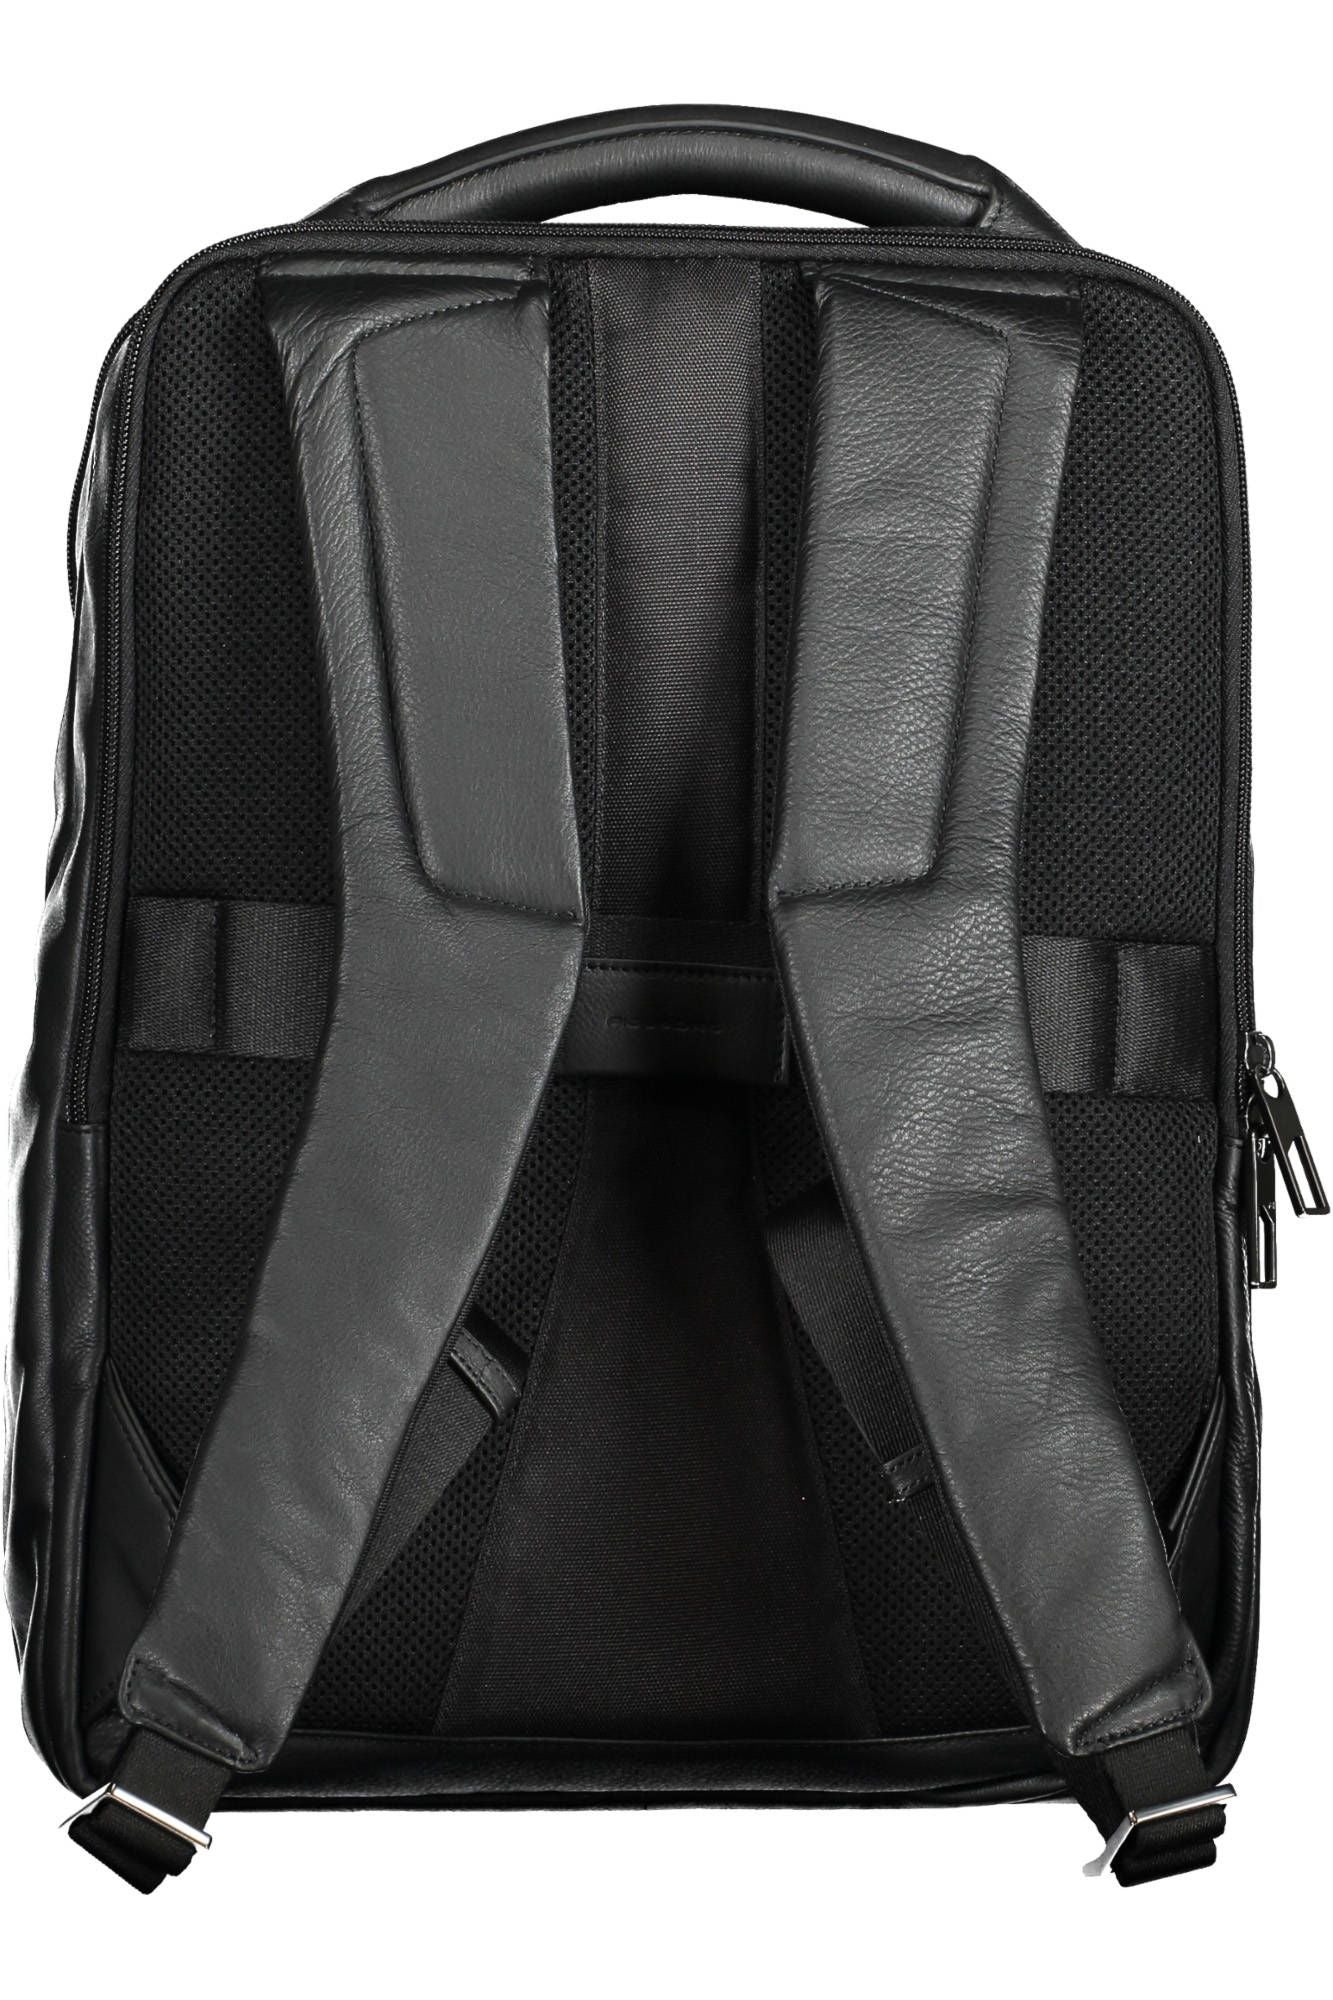 Elegant Leather Backpack with Secure Lock Feature